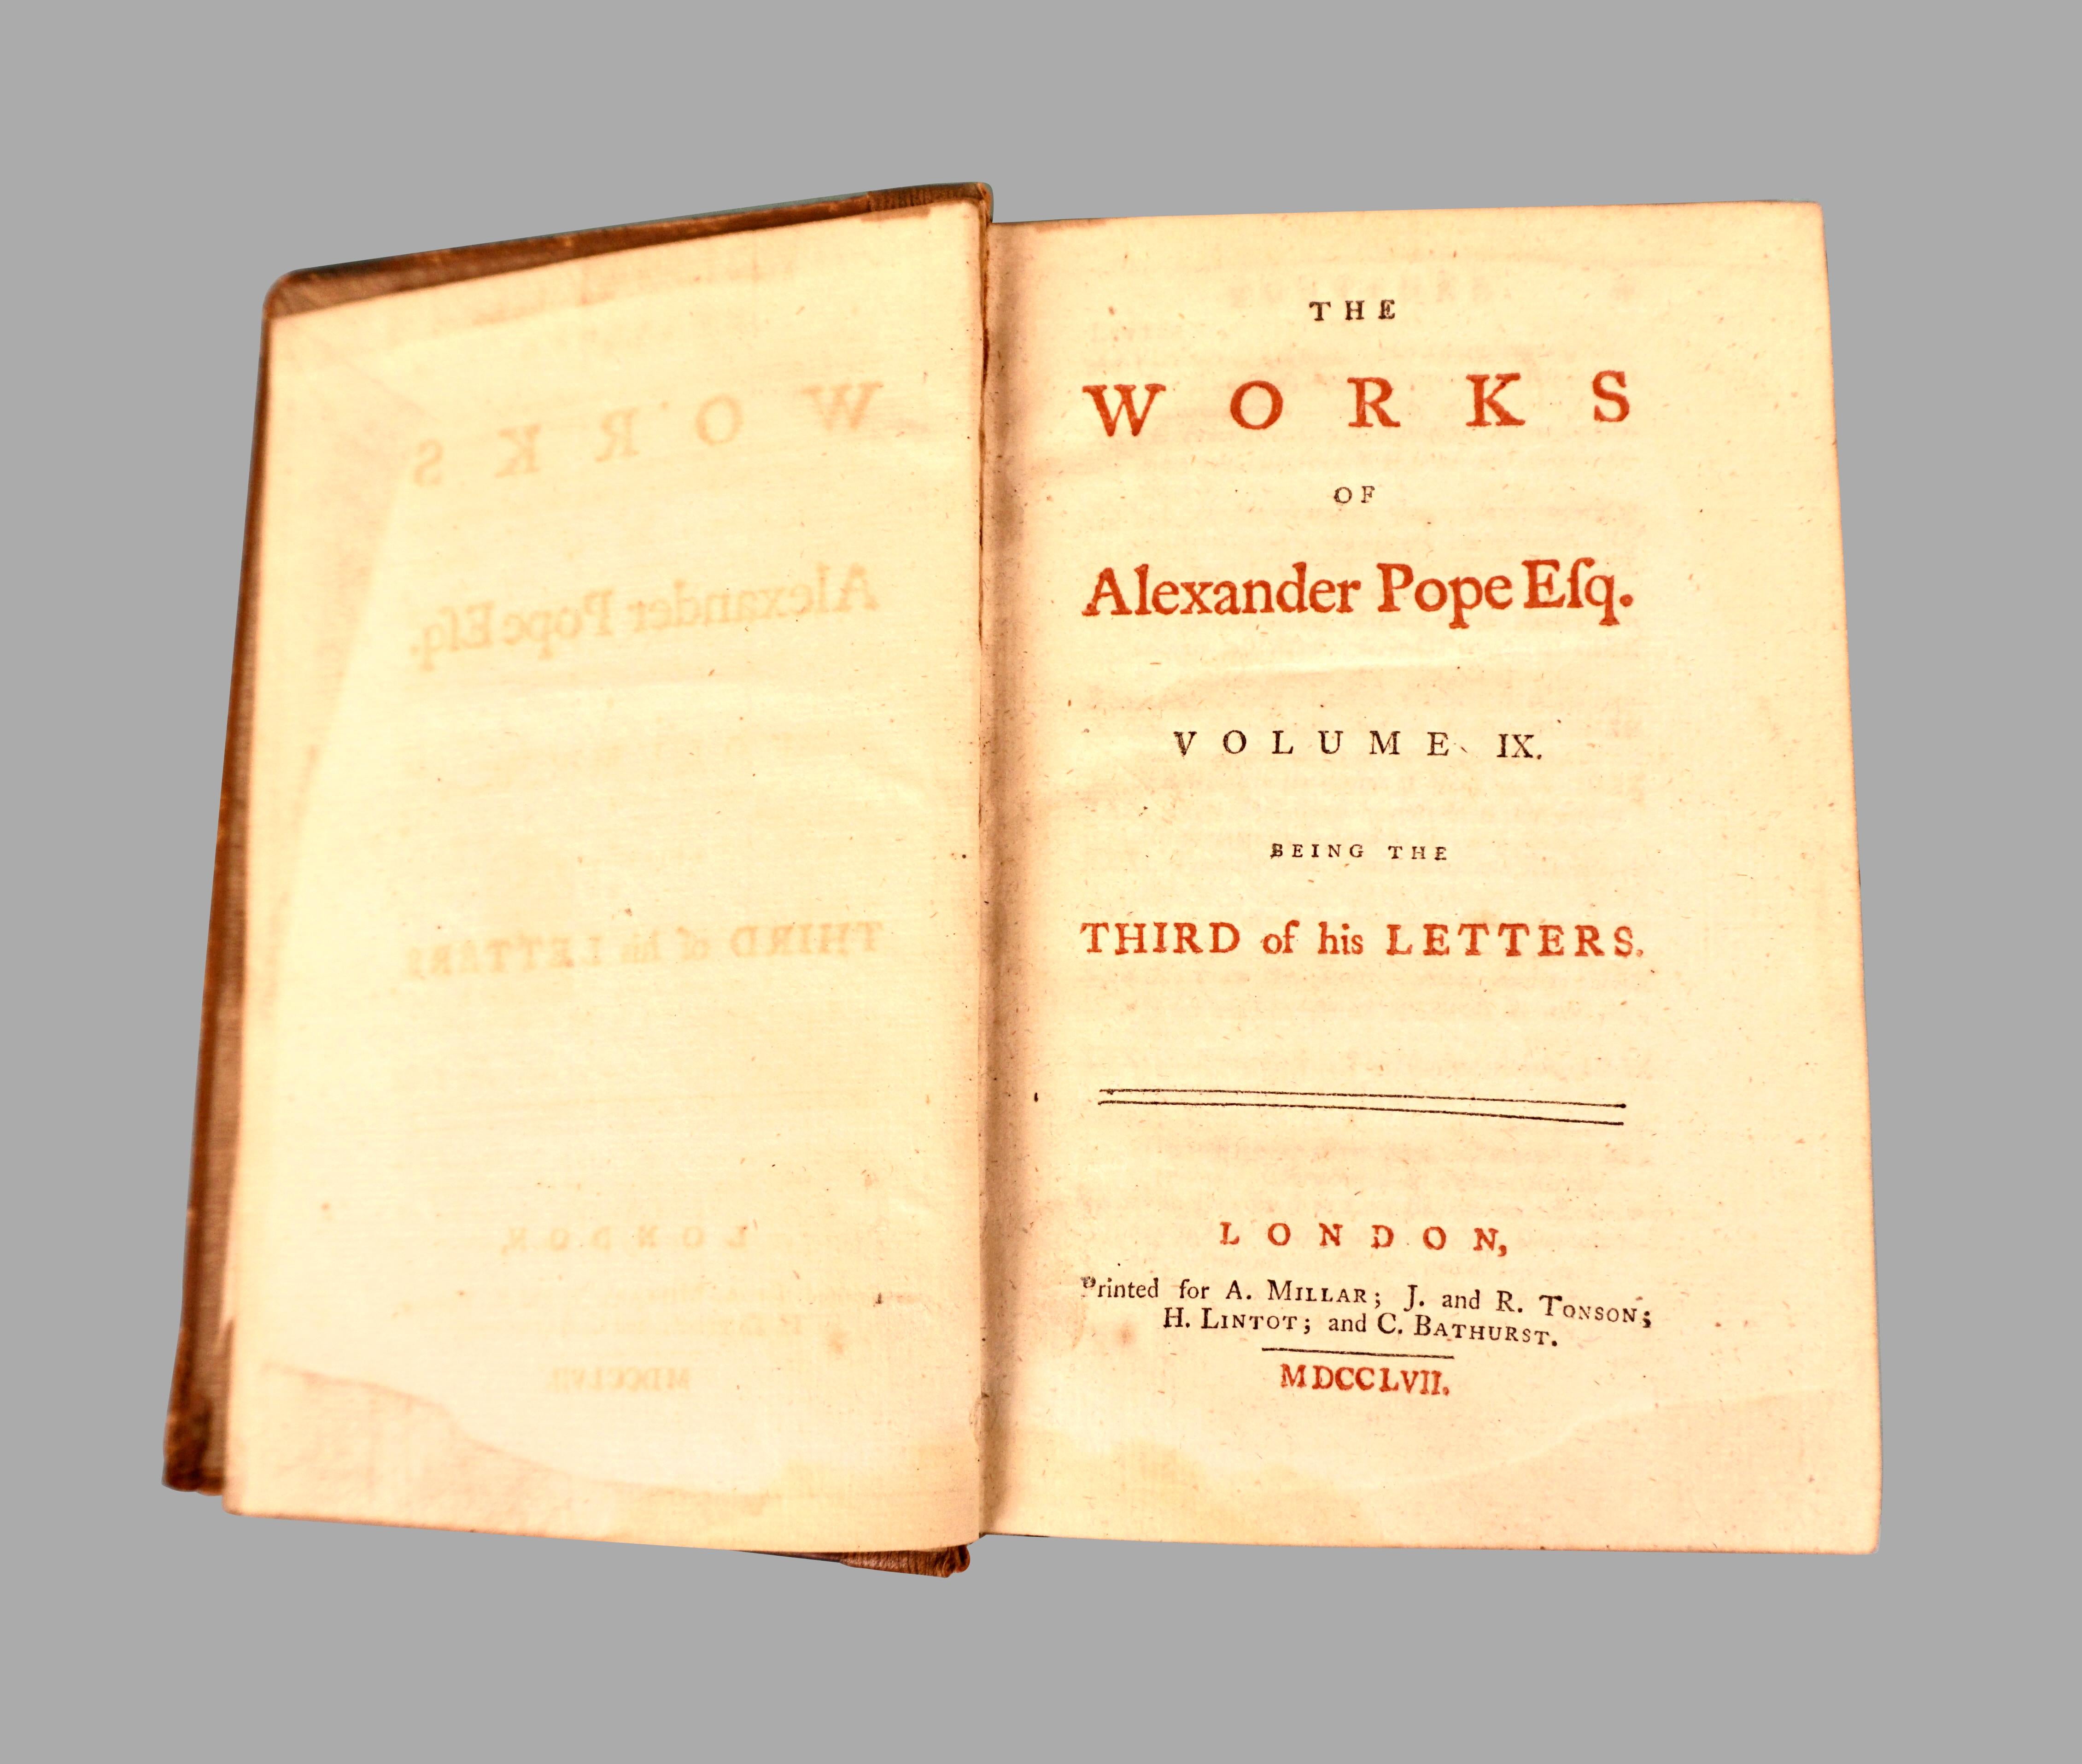 A handsome set of the works of Alexander Pope (1688-1744) the famous English satirist and poet. Pope suffered various health issues throughout his life but with a fierce spirit and work ethic managed to produce a large volume of significant work.